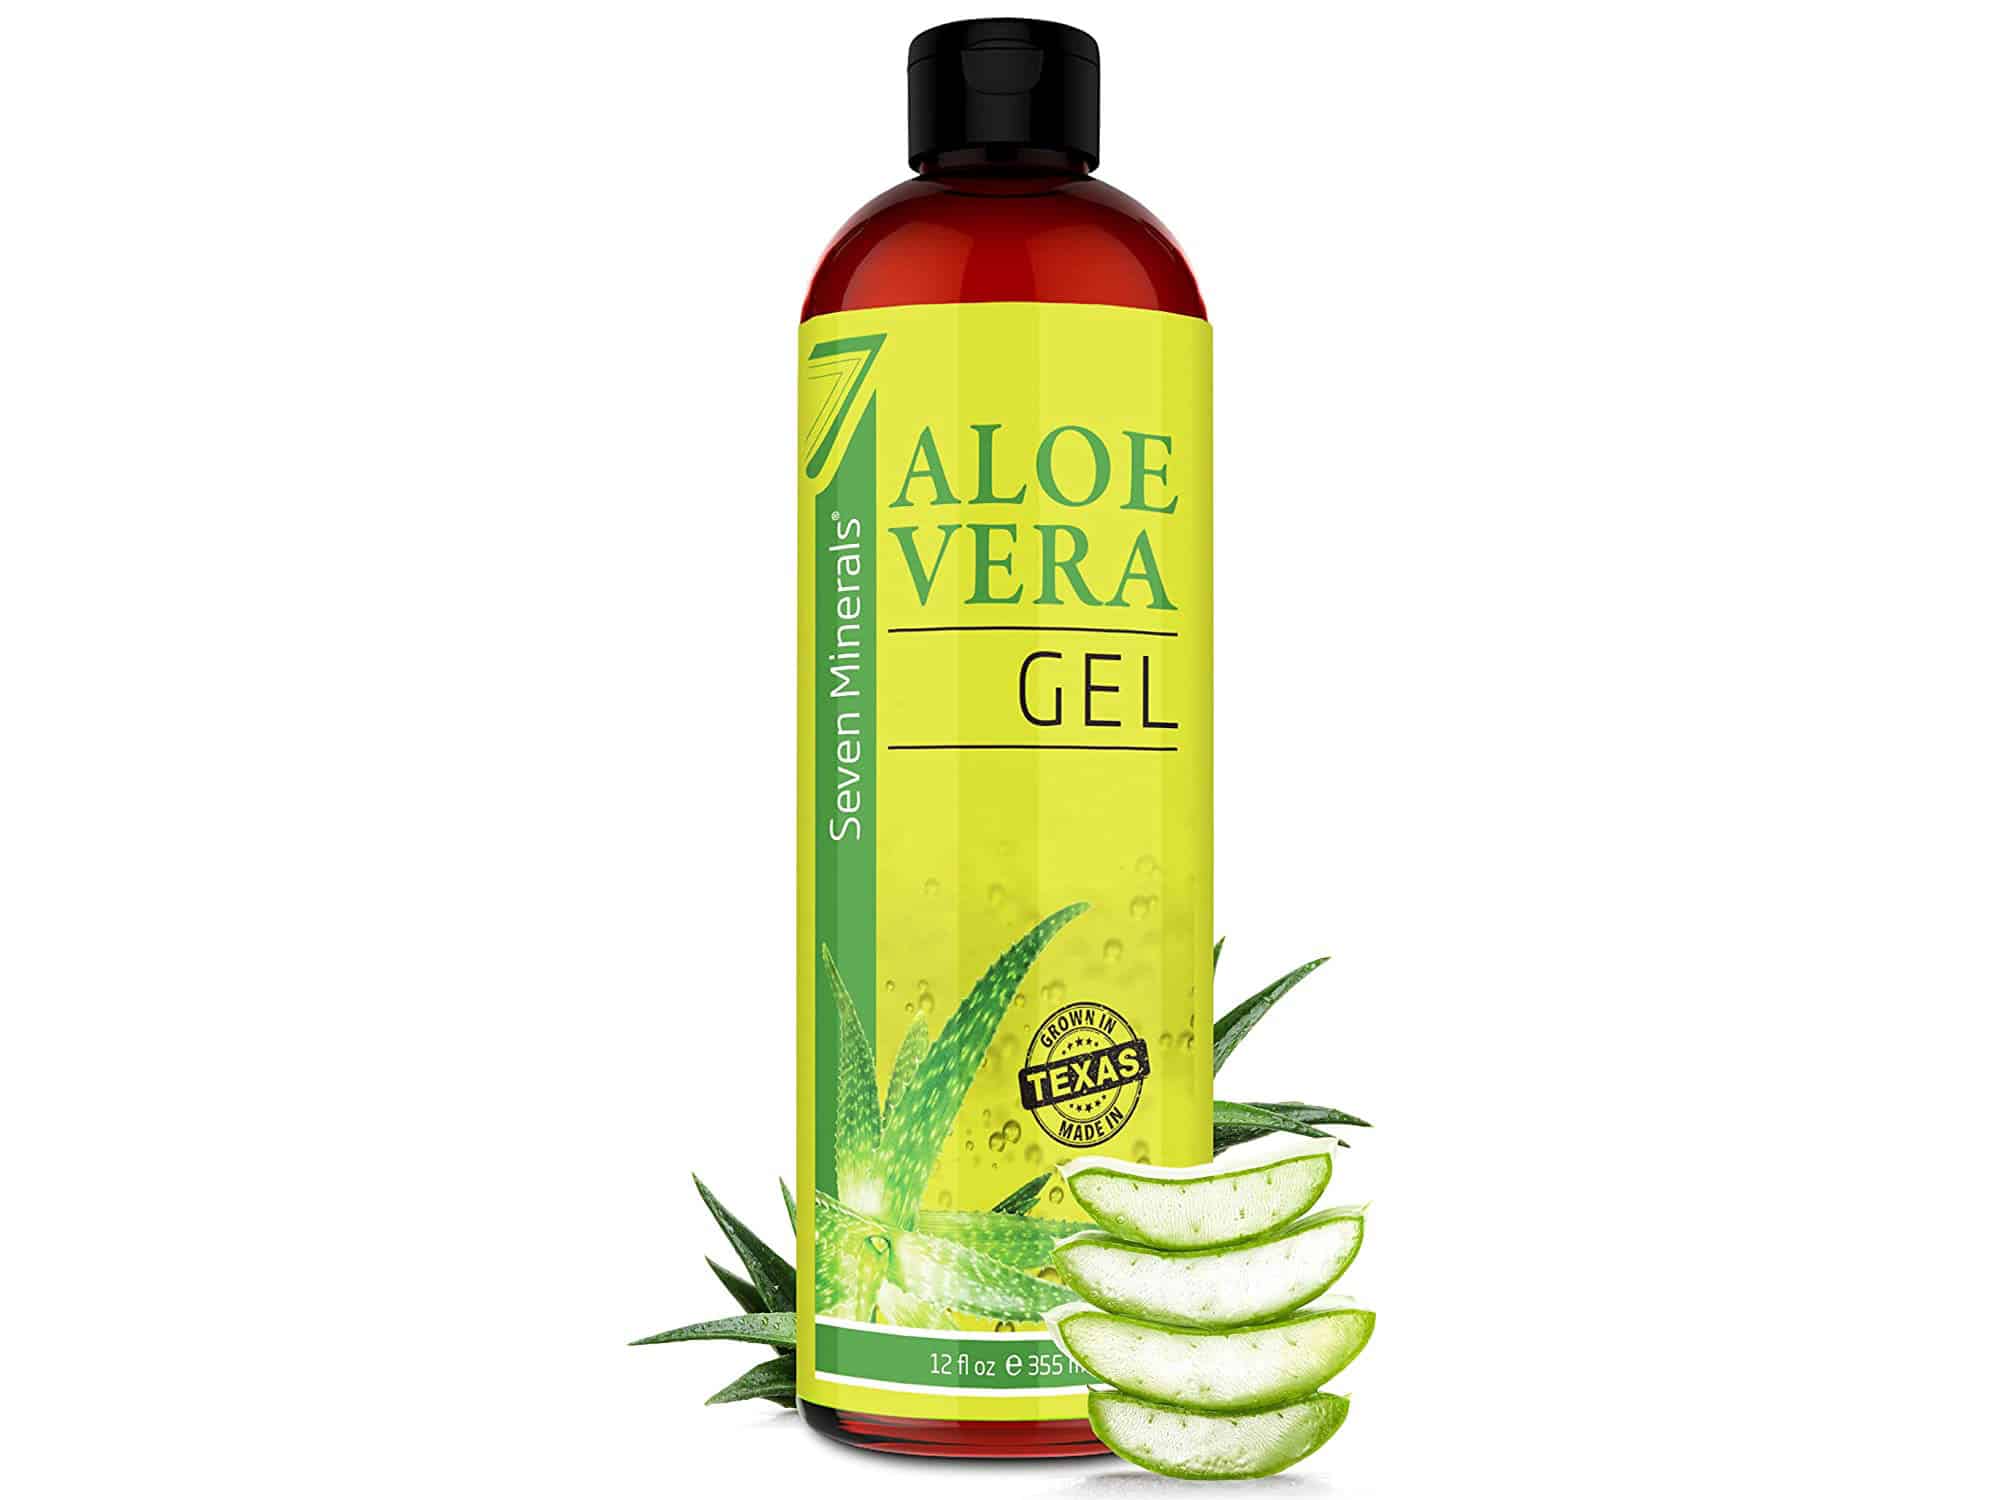 Organic Aloe Vera Gel with 100% Pure Aloe From Freshly Cut Aloe Plant, Not Powder - No Xanthan, So It Absorbs Rapidly With No Sticky Residue - Big 12 oz